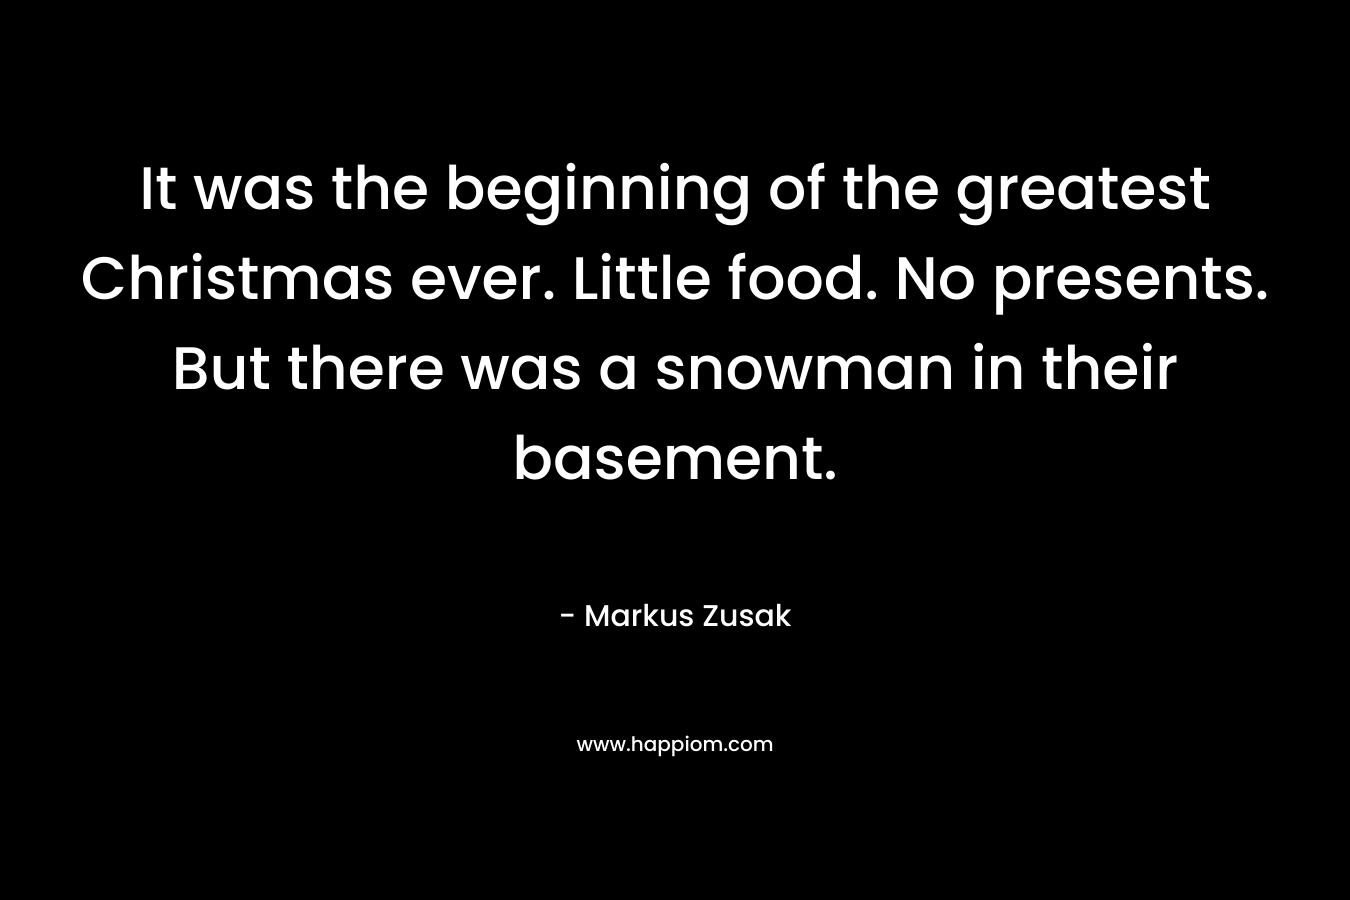 It was the beginning of the greatest Christmas ever. Little food. No presents. But there was a snowman in their basement. – Markus Zusak